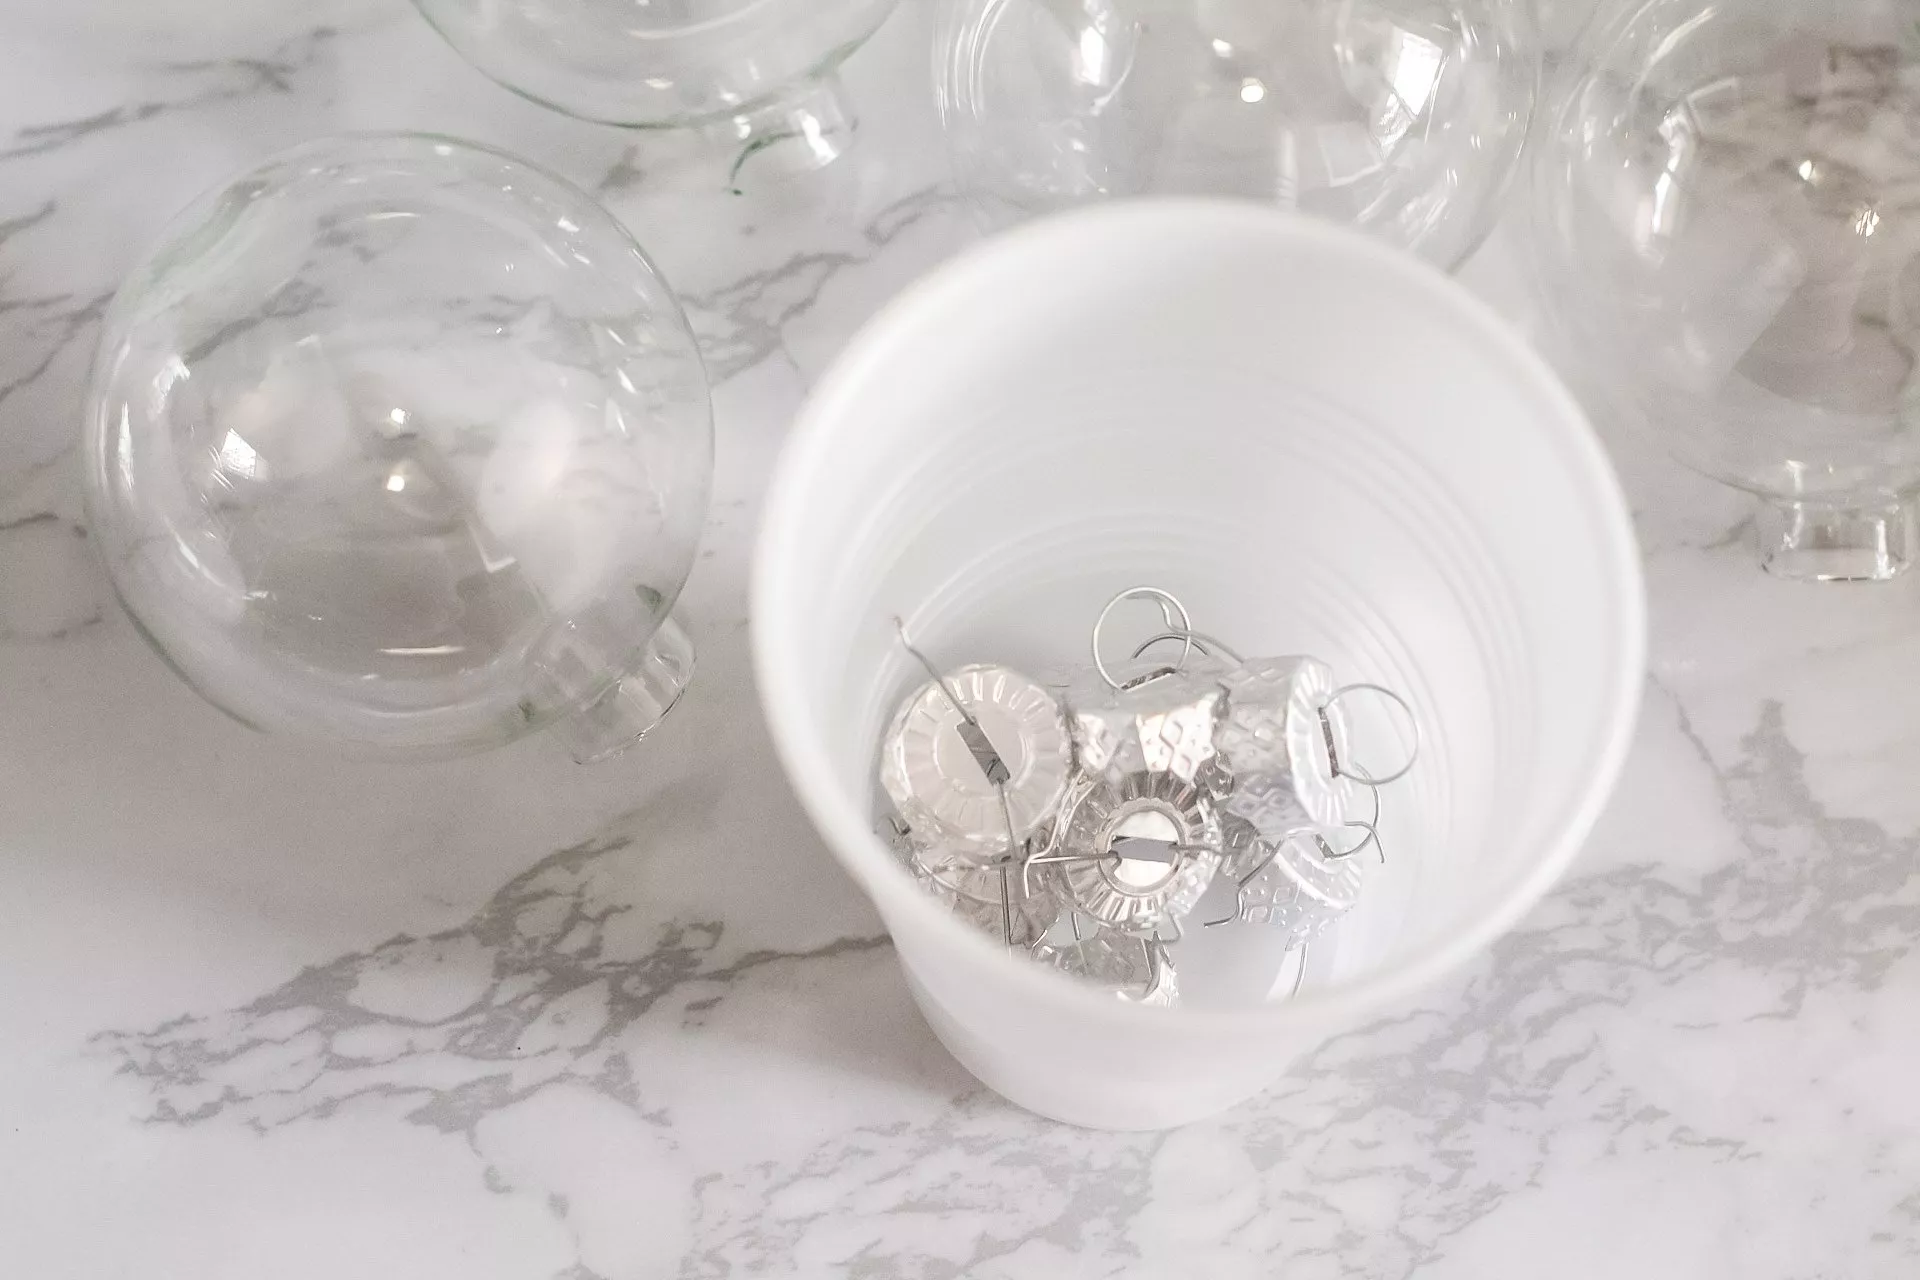 glass ornament tops removed and placed in a cup